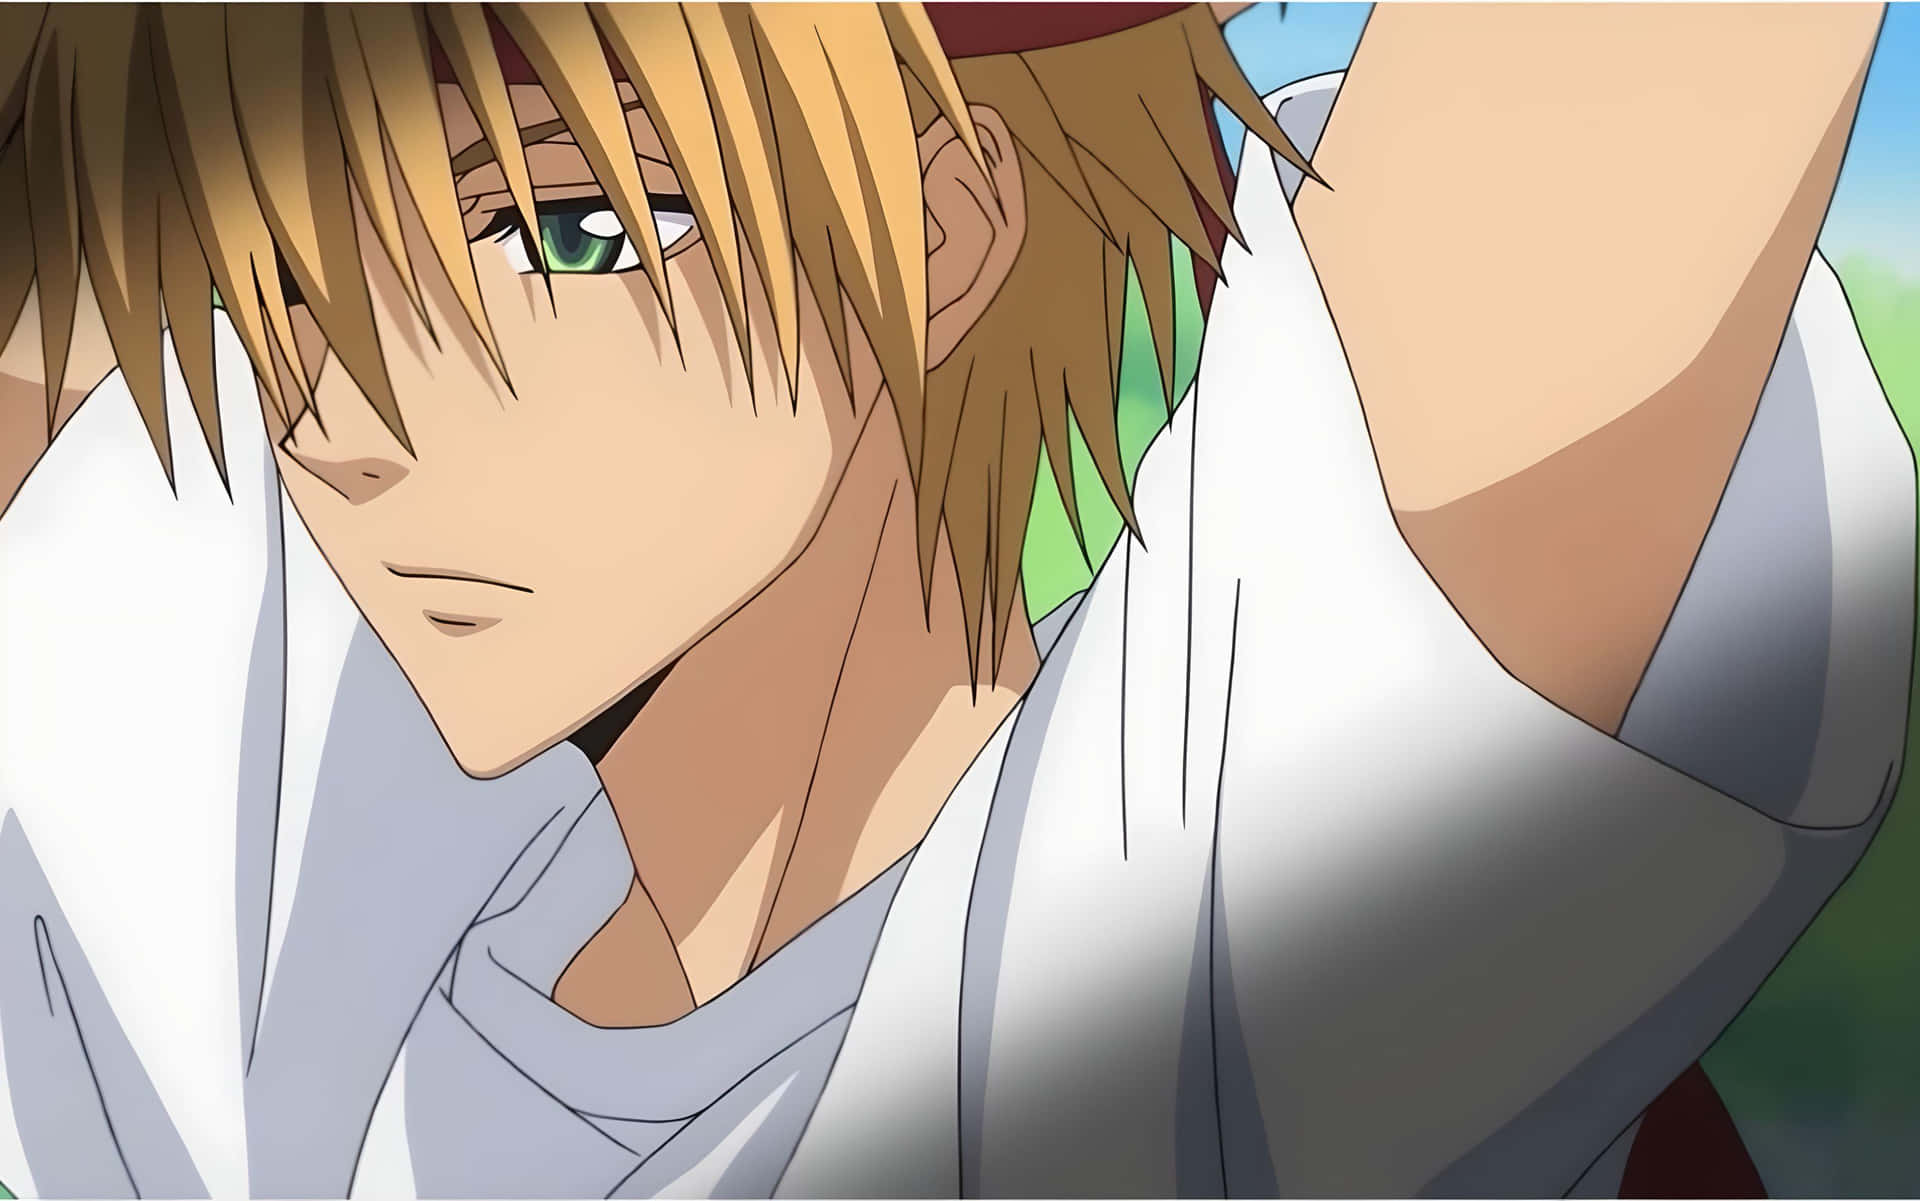 Why Does Usui Takumi Live Alone In Japan? - FirstCuriosity